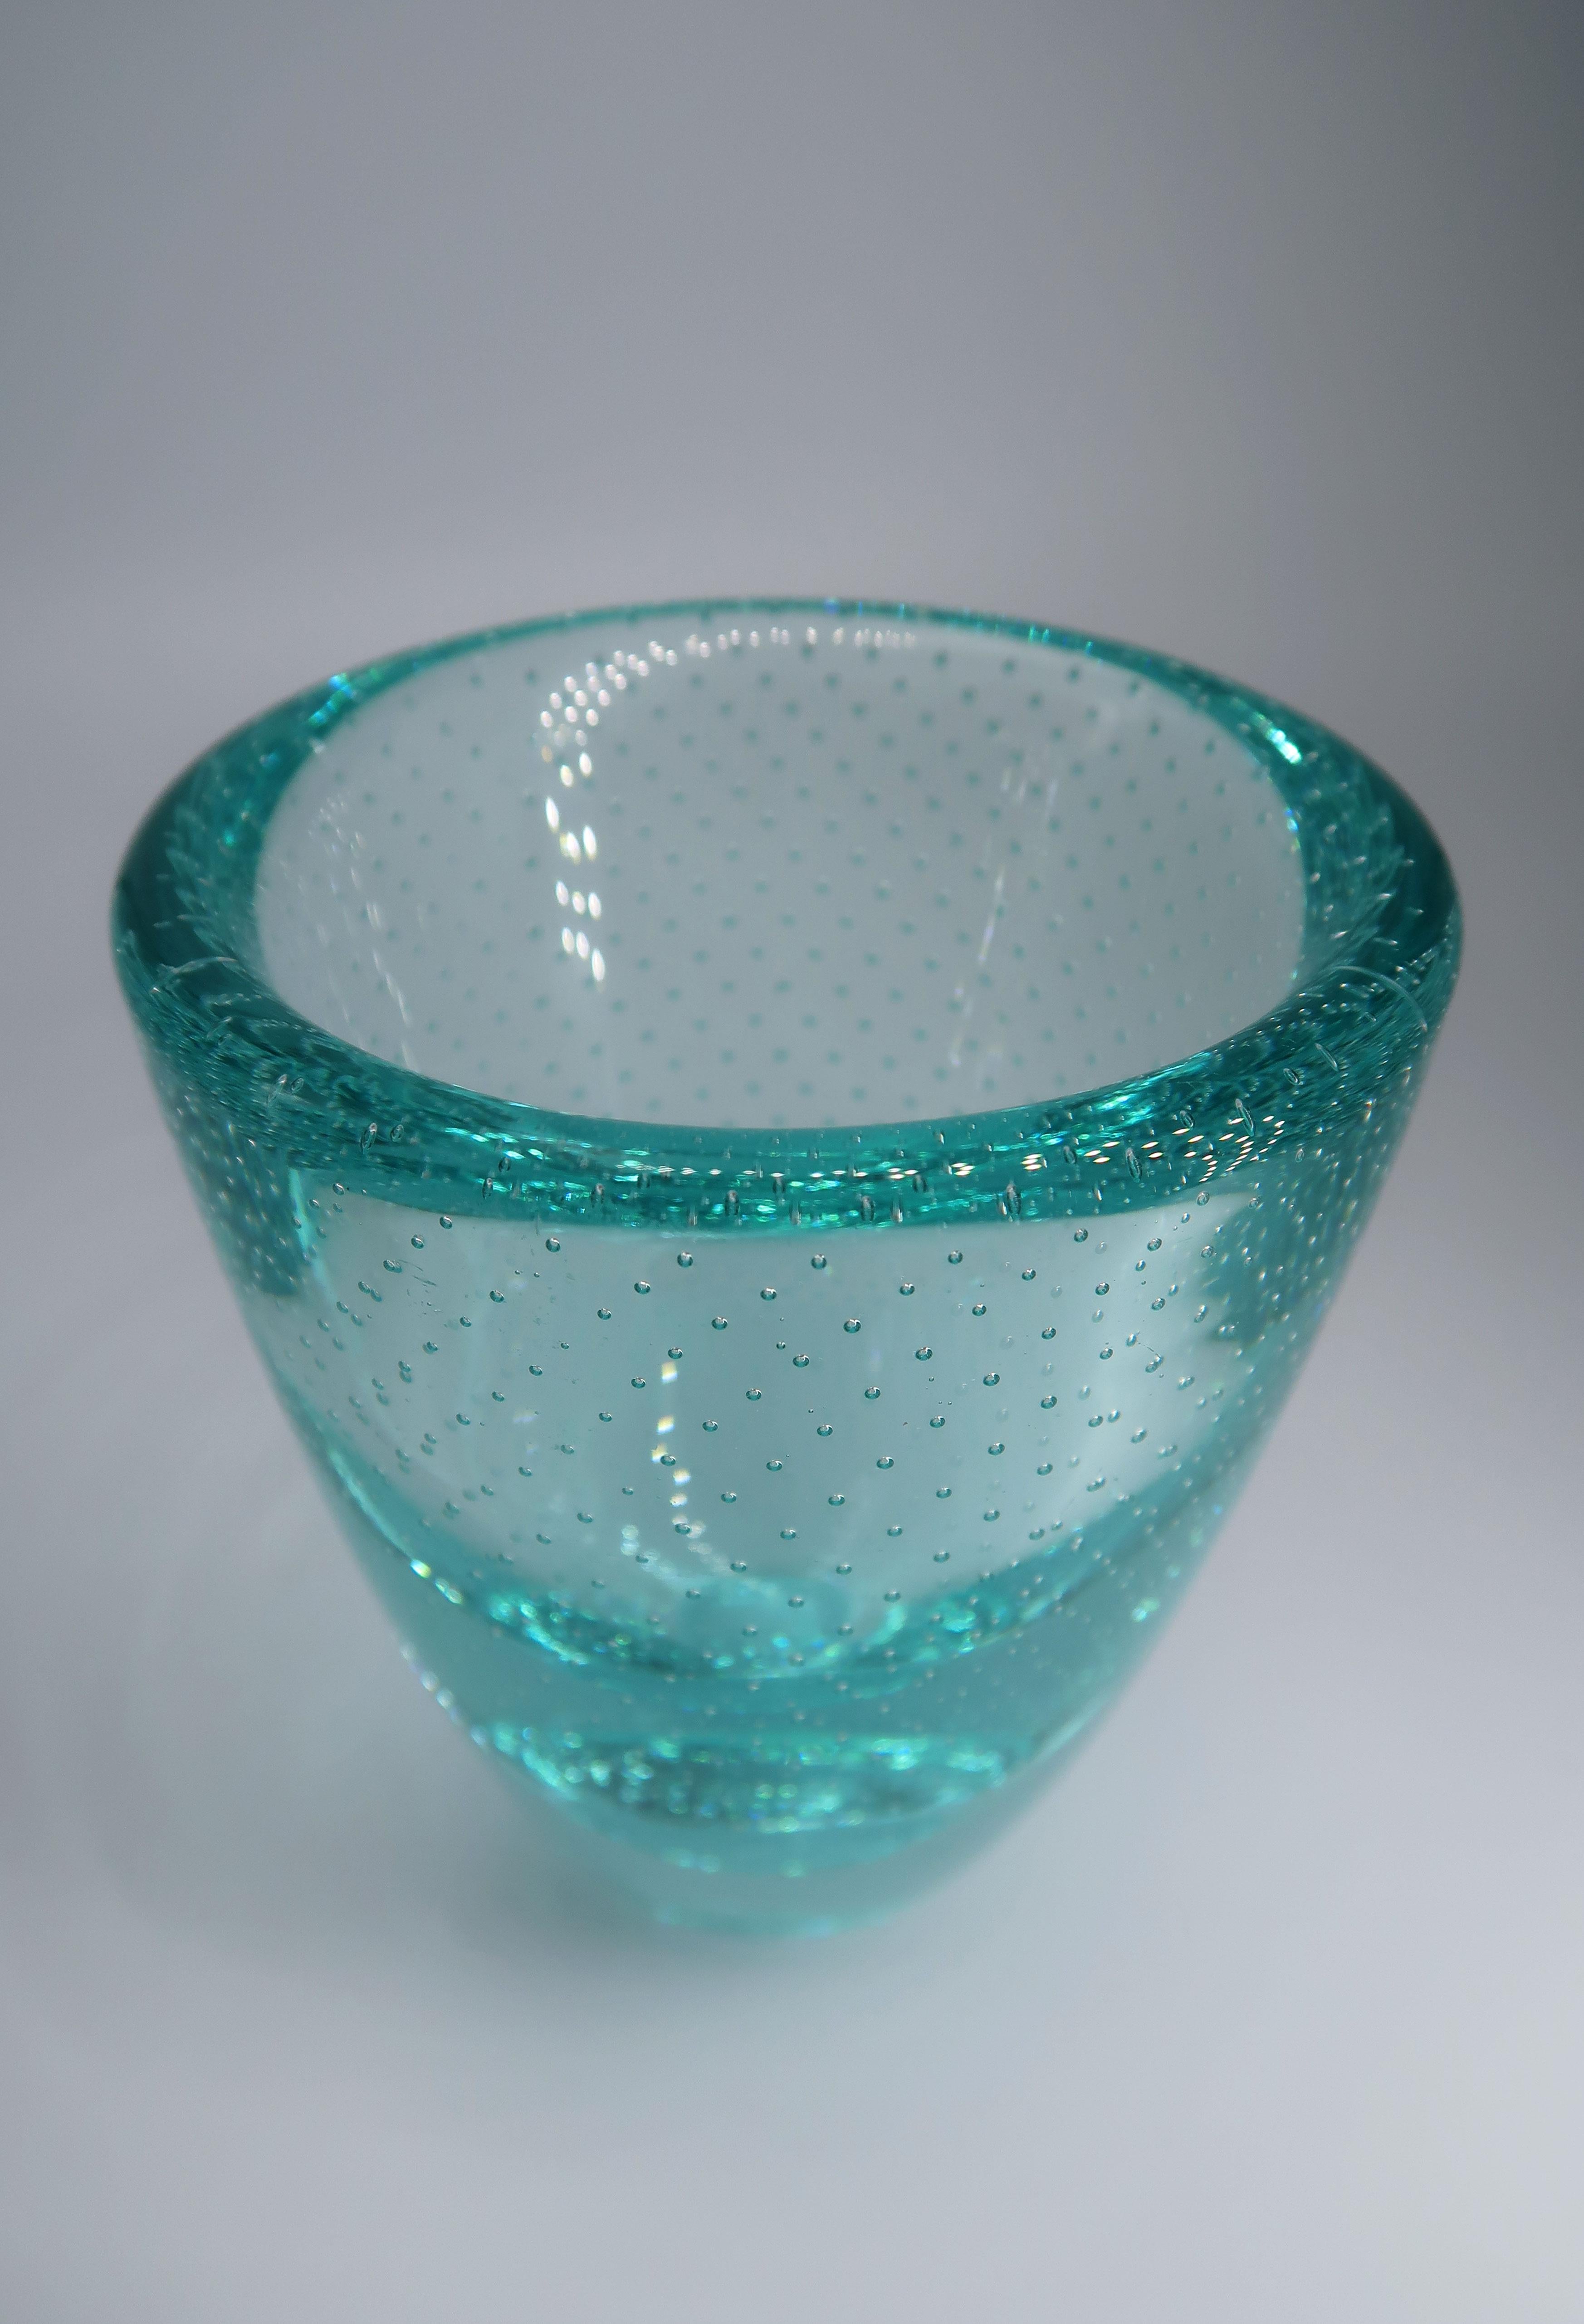 vintage glass with bubbles